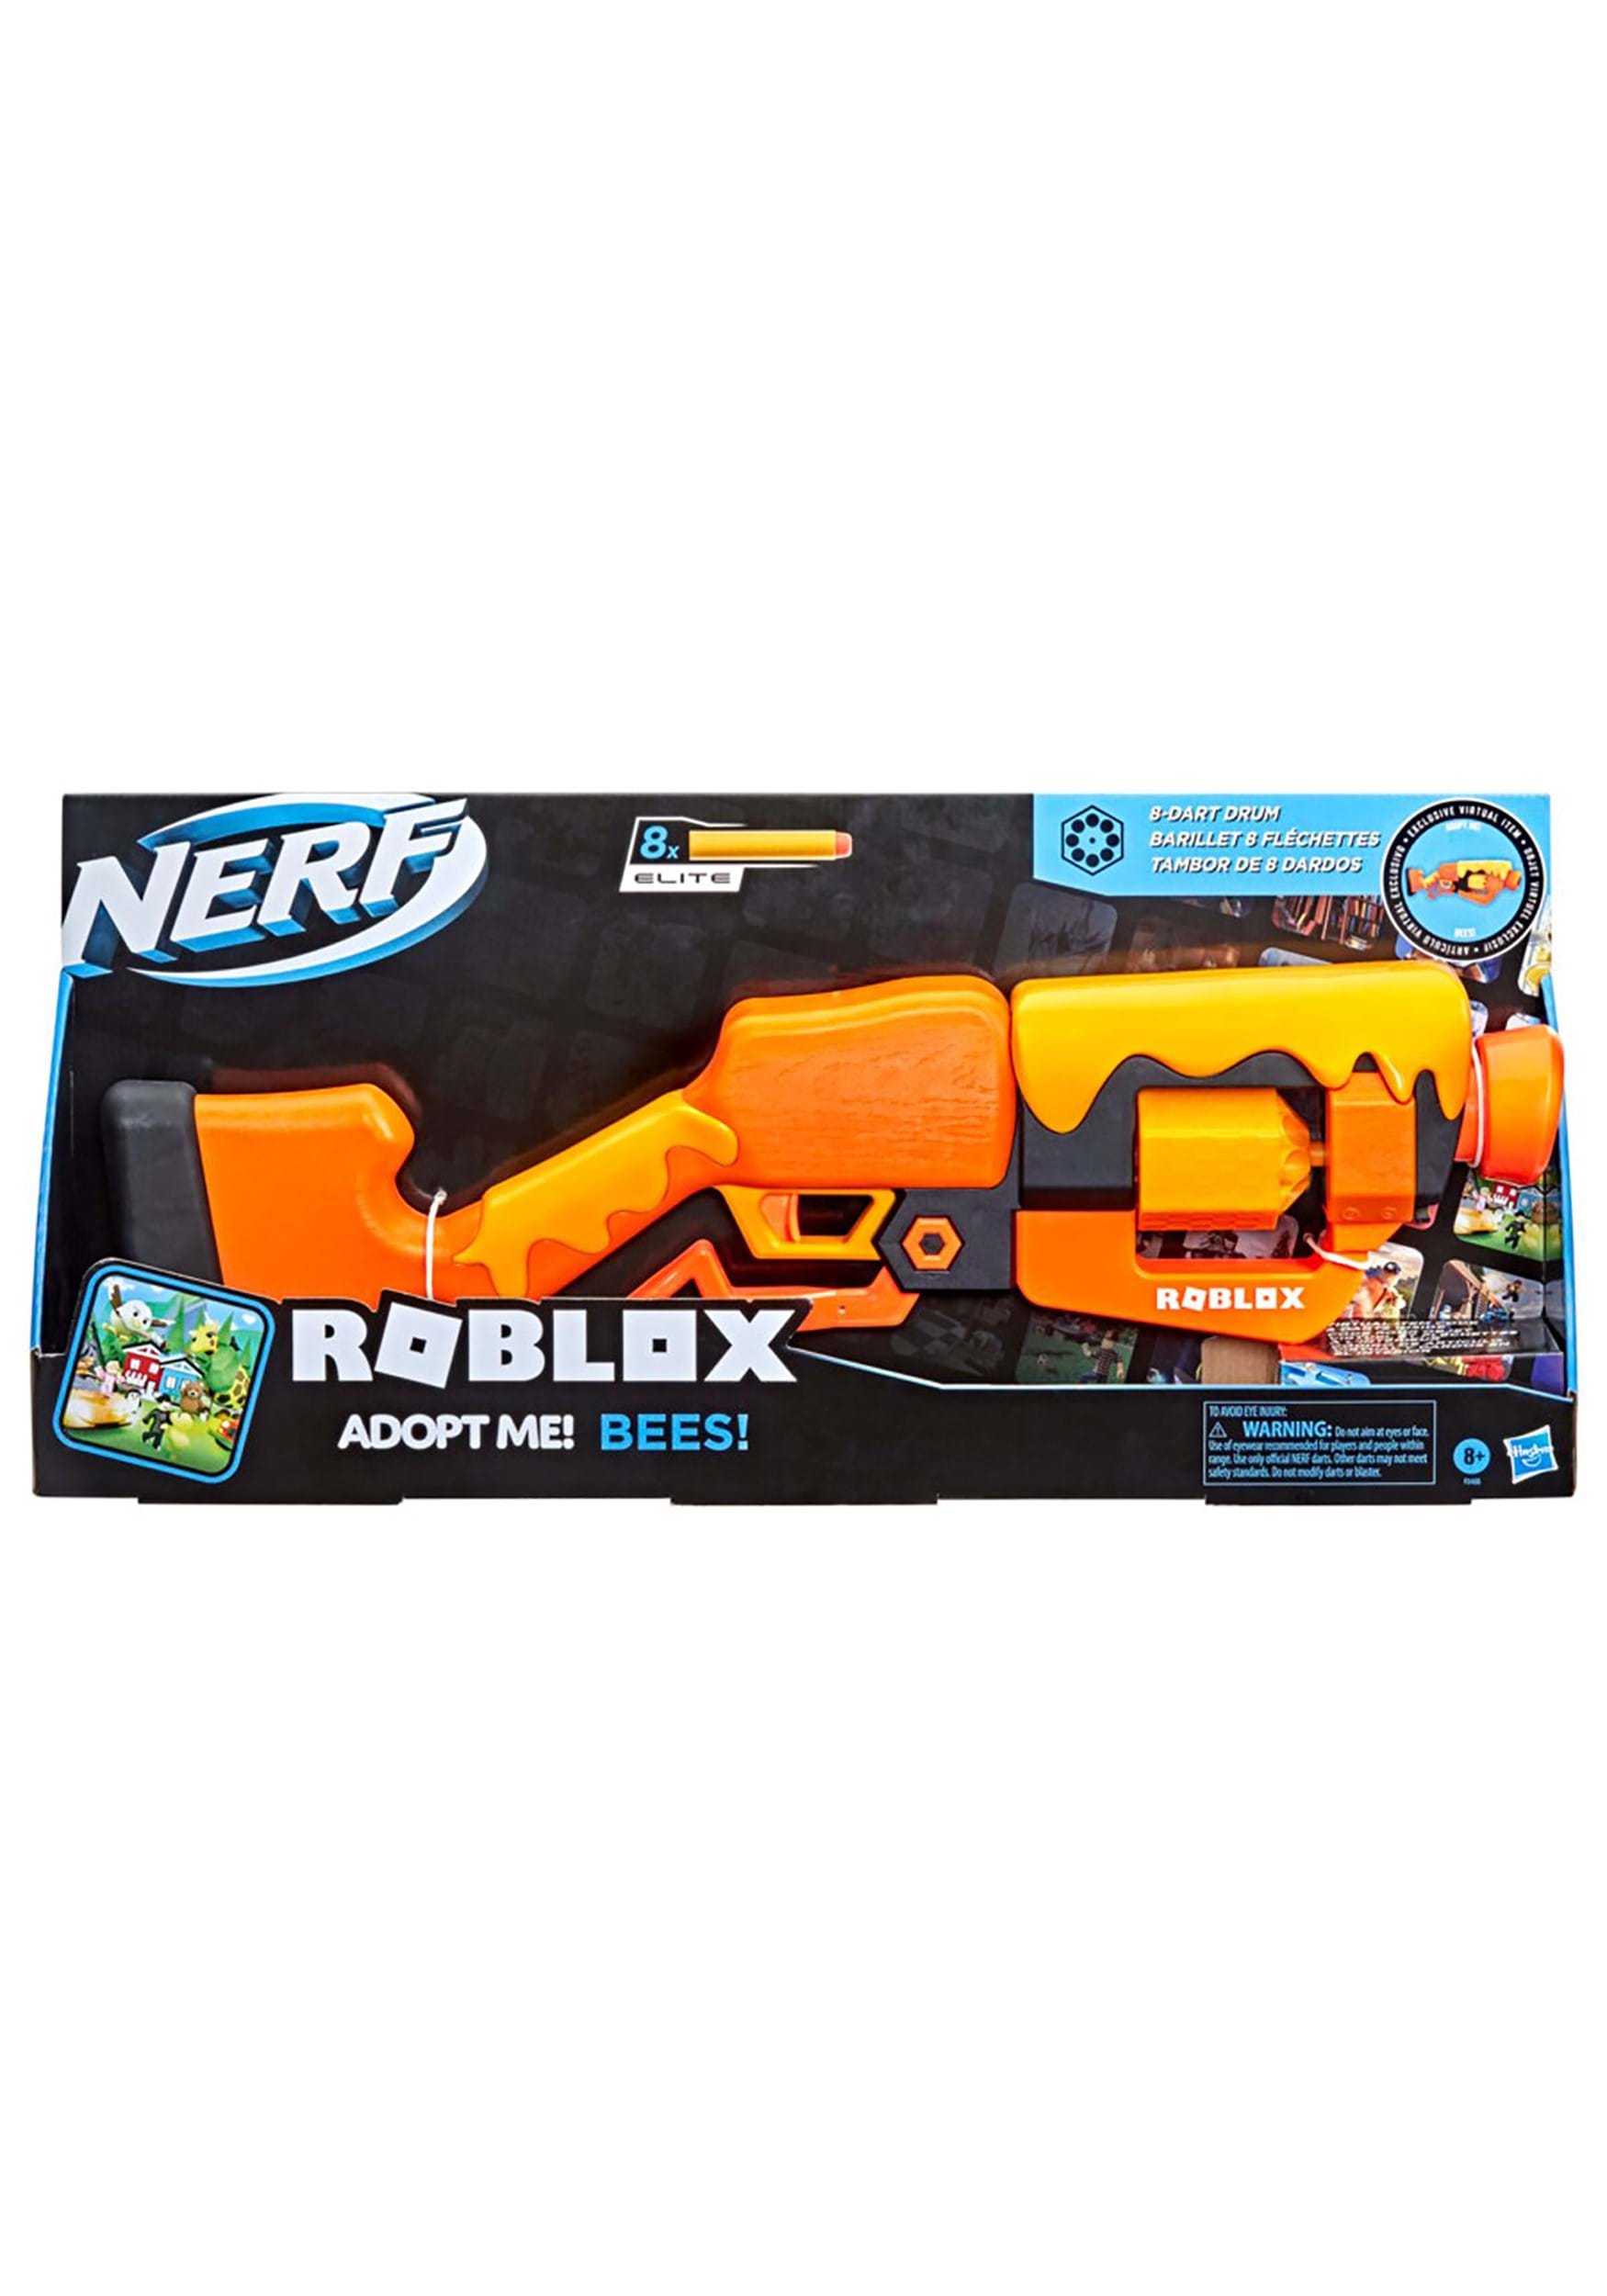 Nerf Roblox Adopt Me!: Bees!